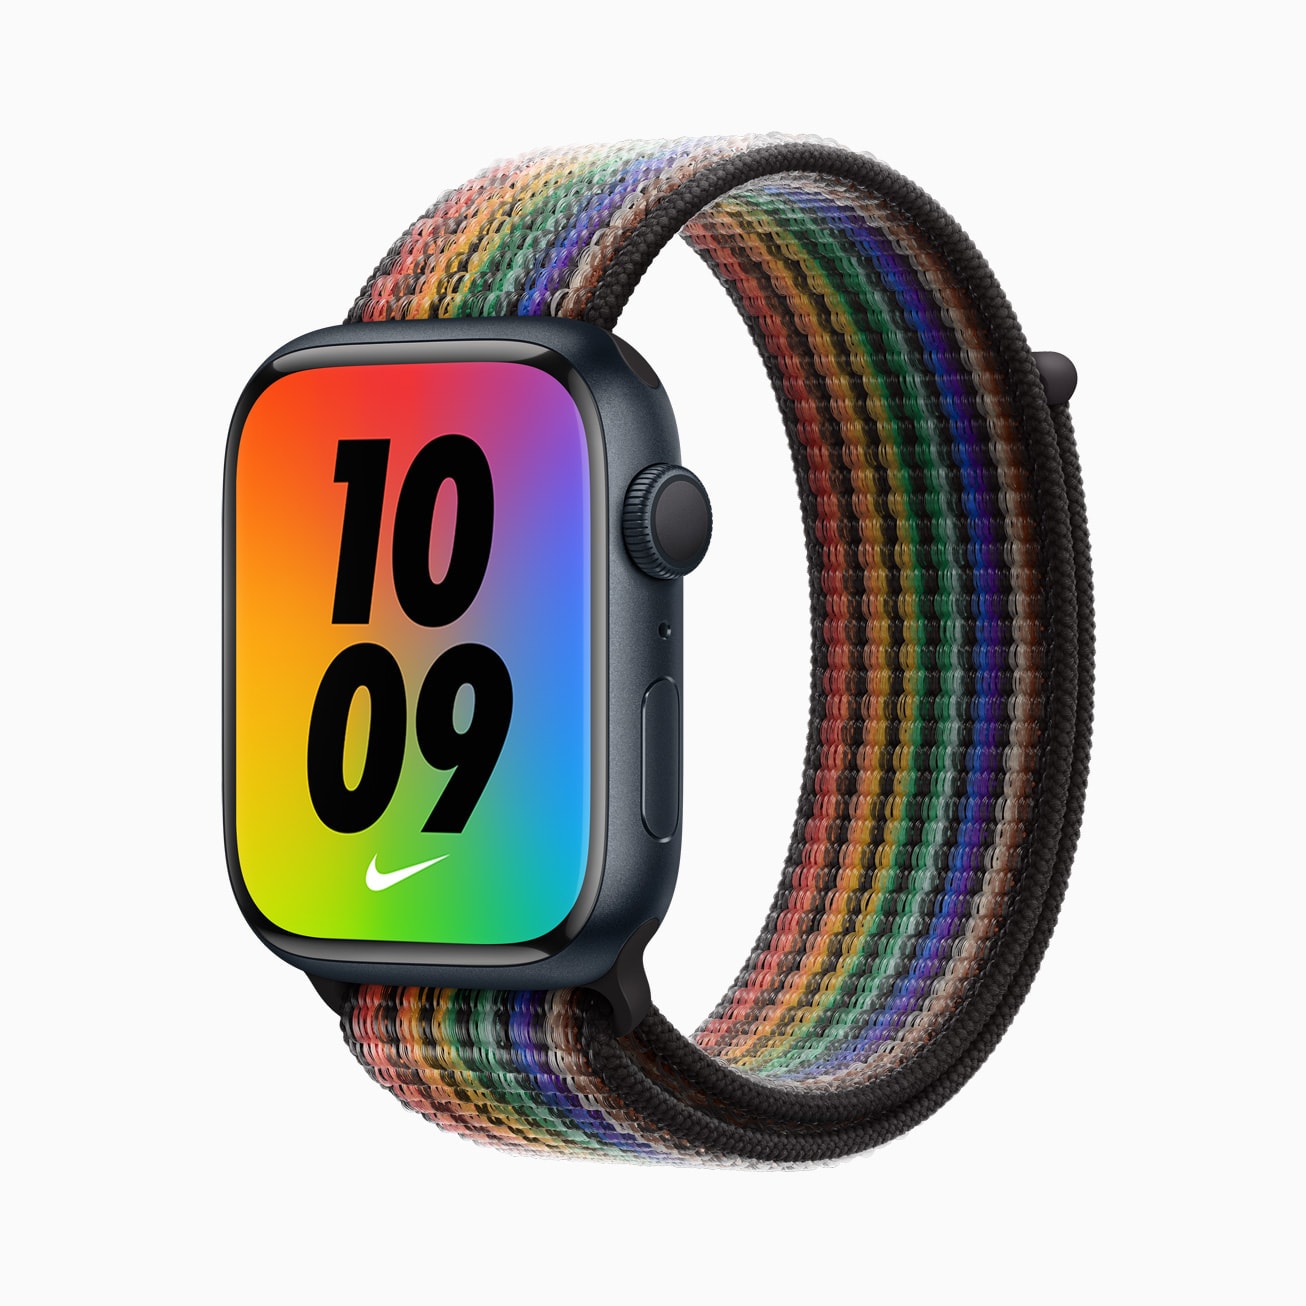 The Pride Edition Nike Sport Loop shown with the new matching face.